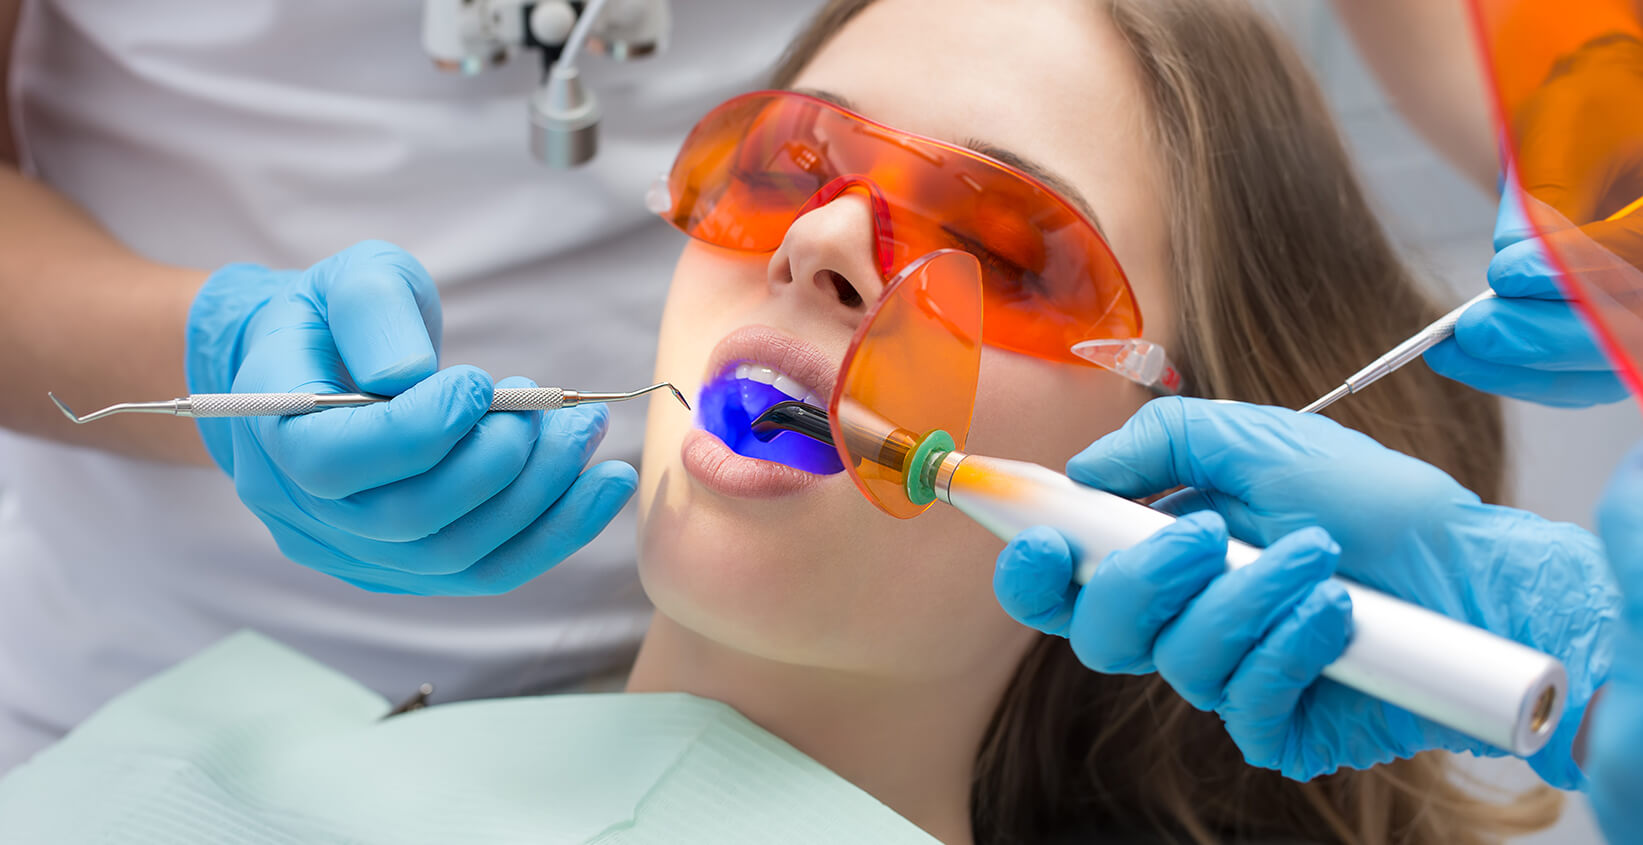 Practice Offers Laser Treatments in Dentistry in Manhattan Beach, CA Area